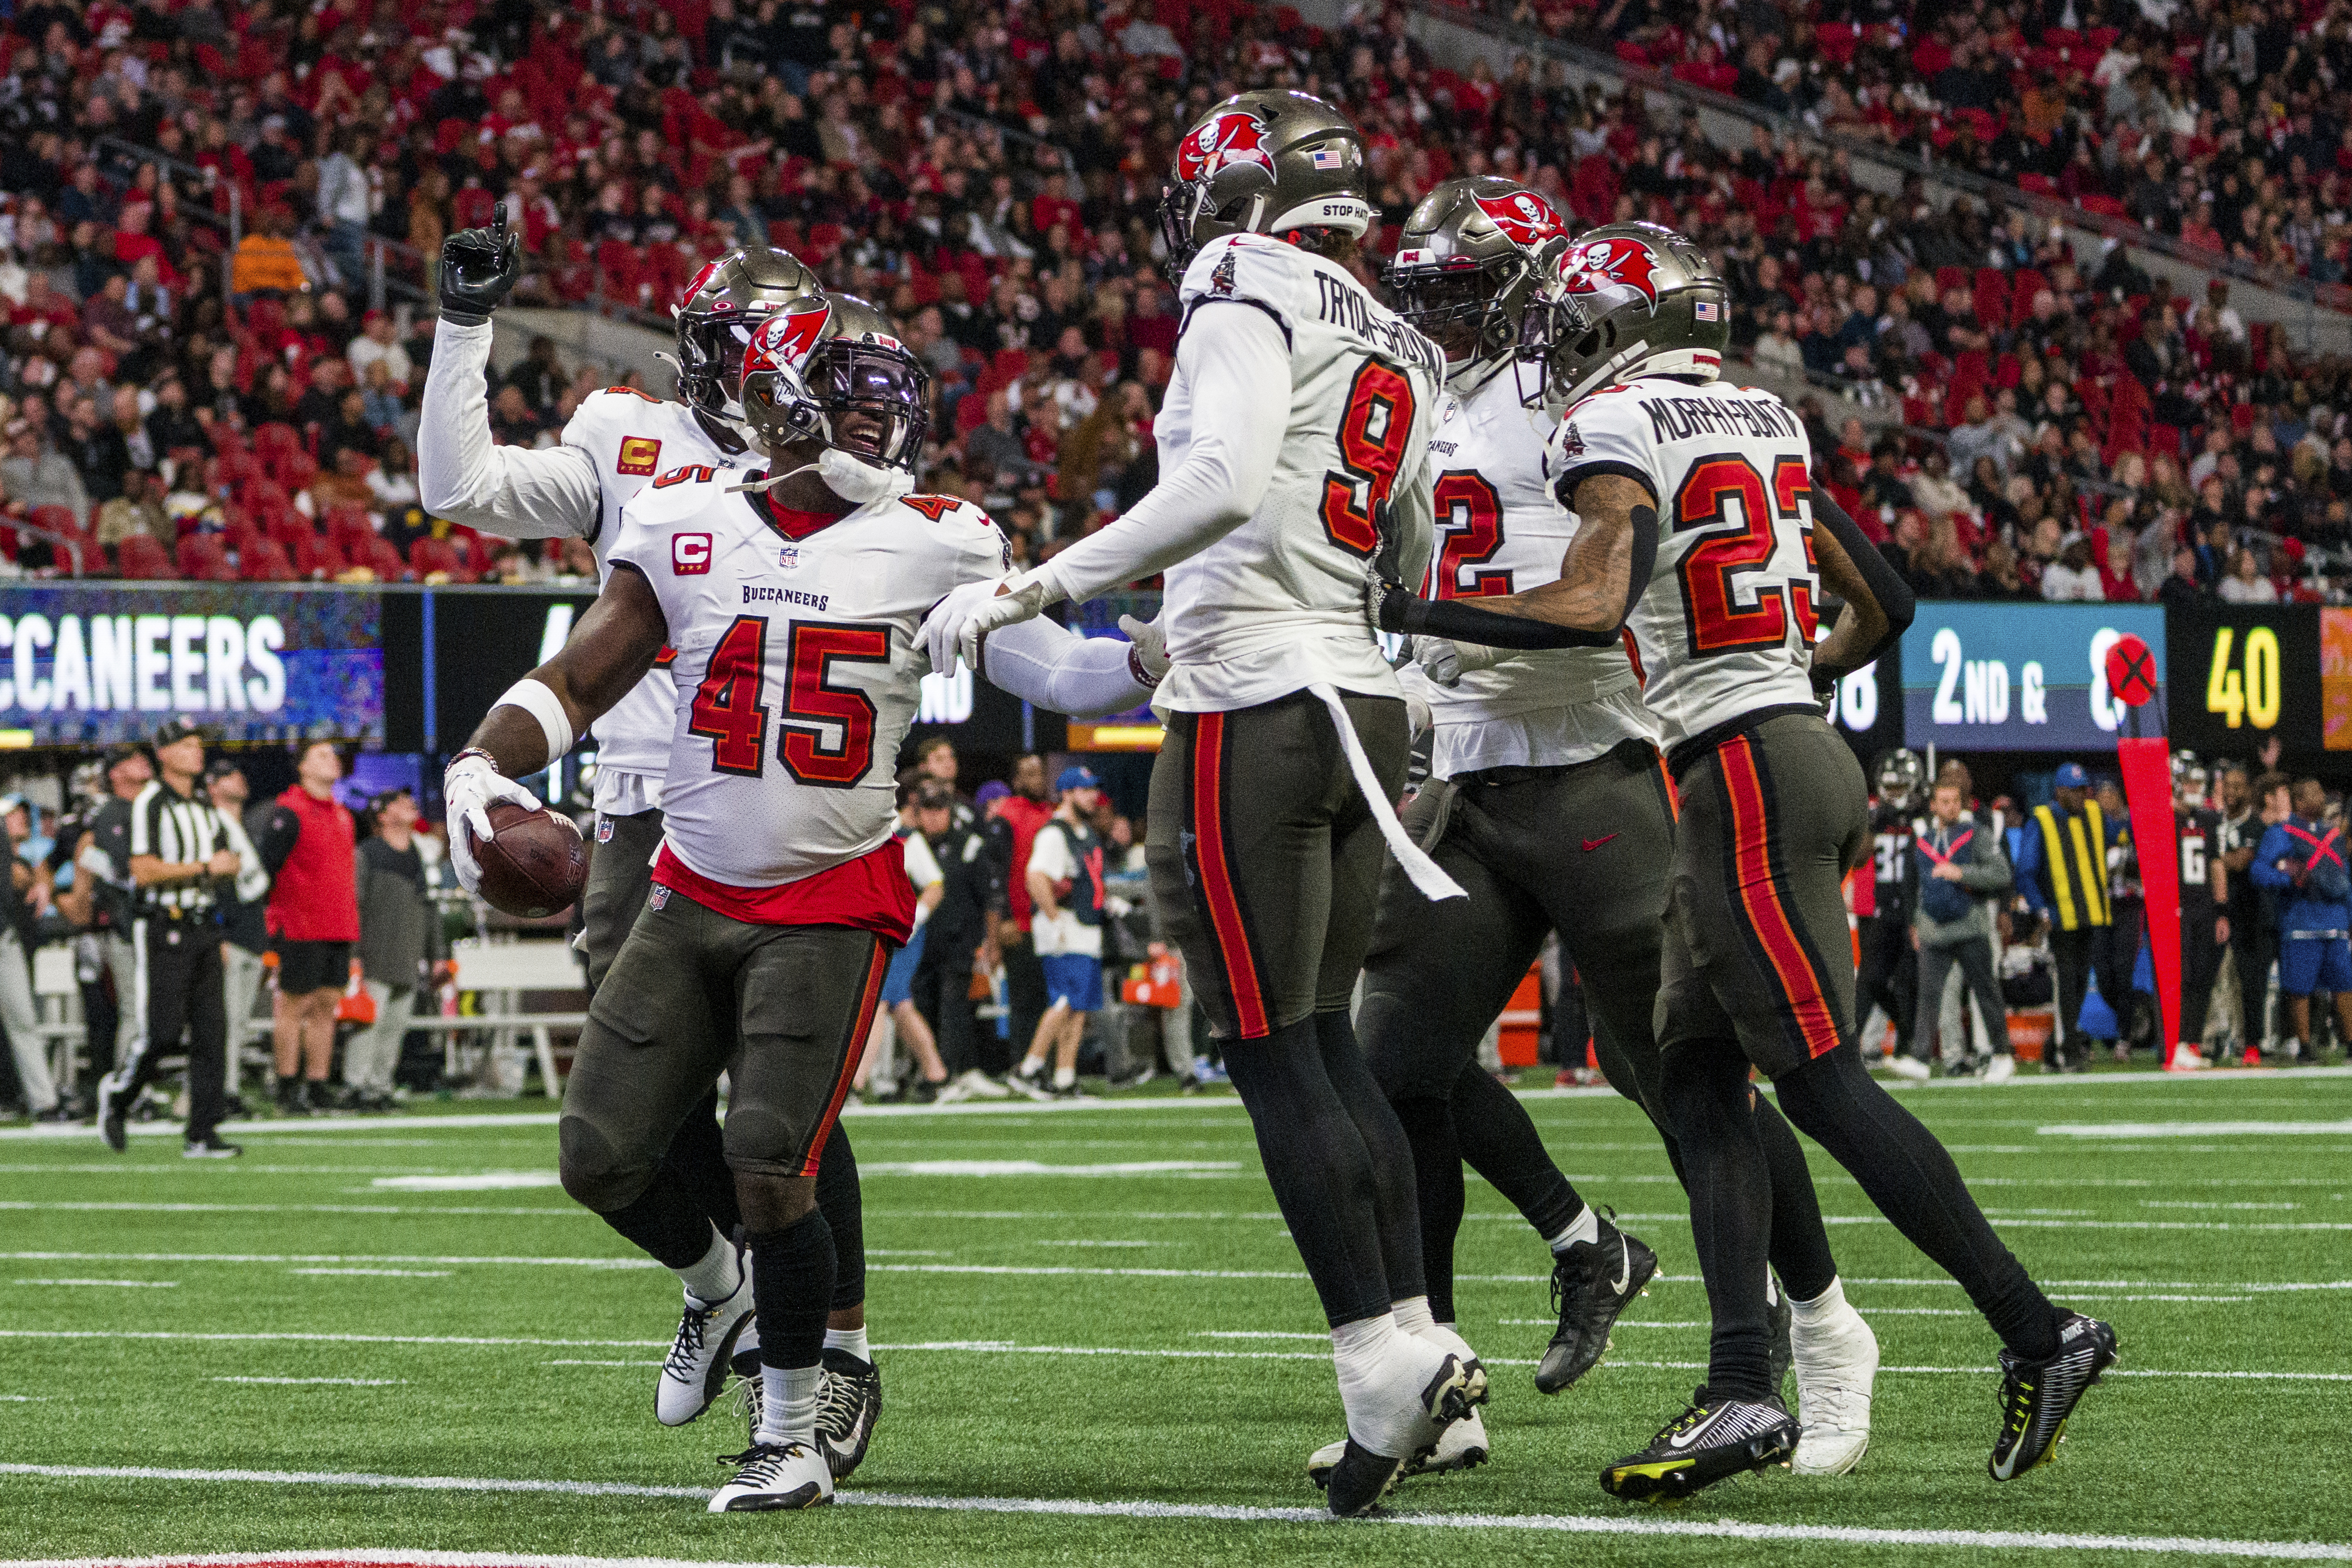 While Cowboys are coughing up turnovers, Buccaneers are collecting them in  bunches